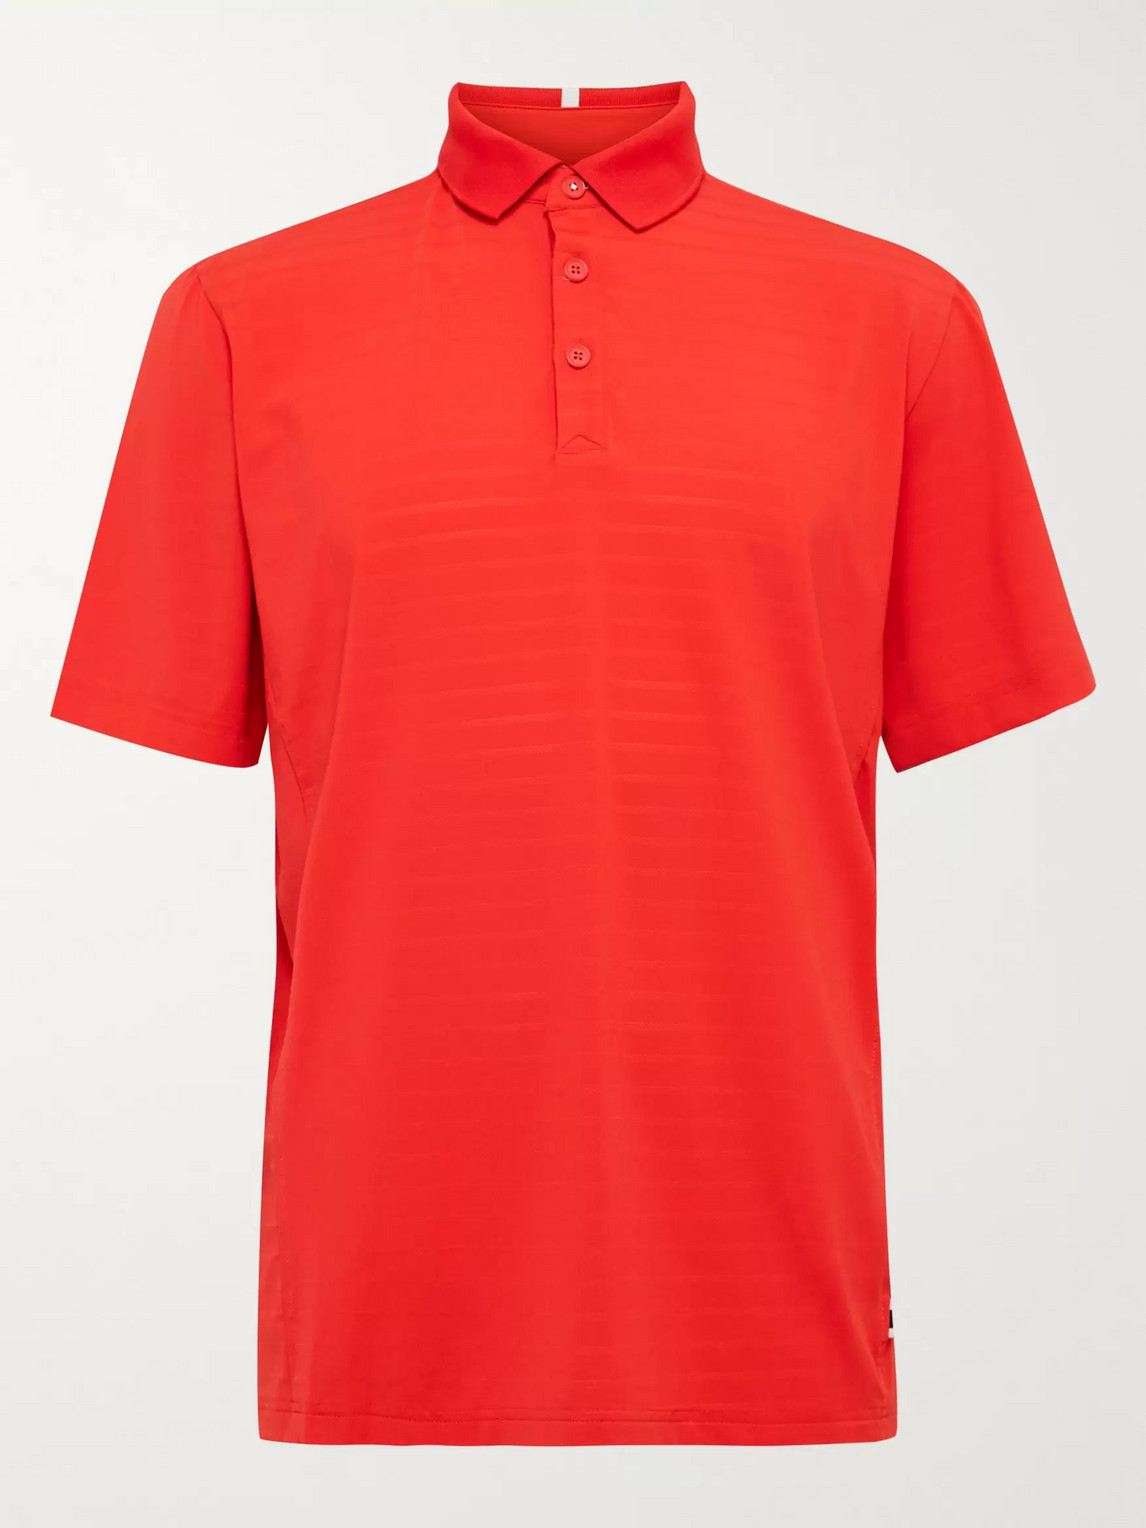 Adidas Golf Adipure Premium Performance Striped Stretch-jersey Golf Polo Shirt In Red